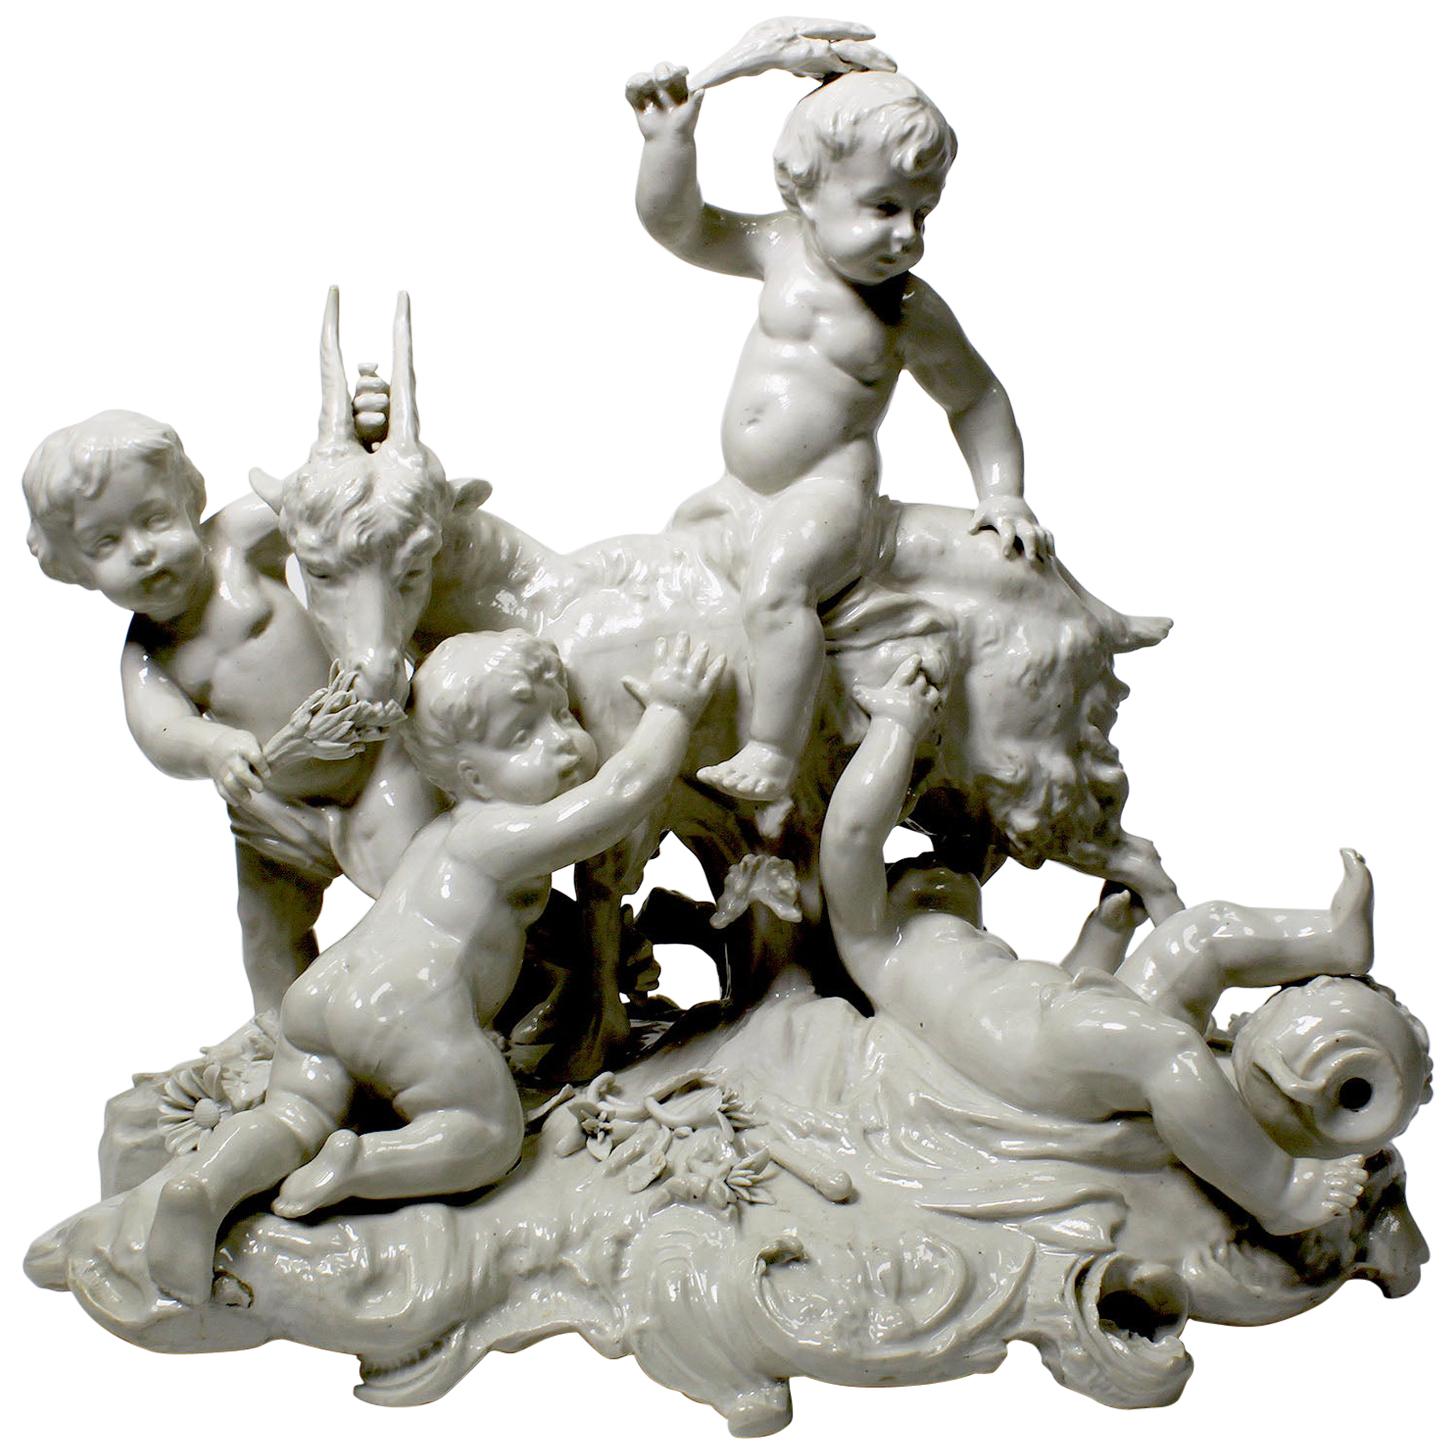 Whimsical White Glazed Porcelain Group of Four Putti Playing with a Goat